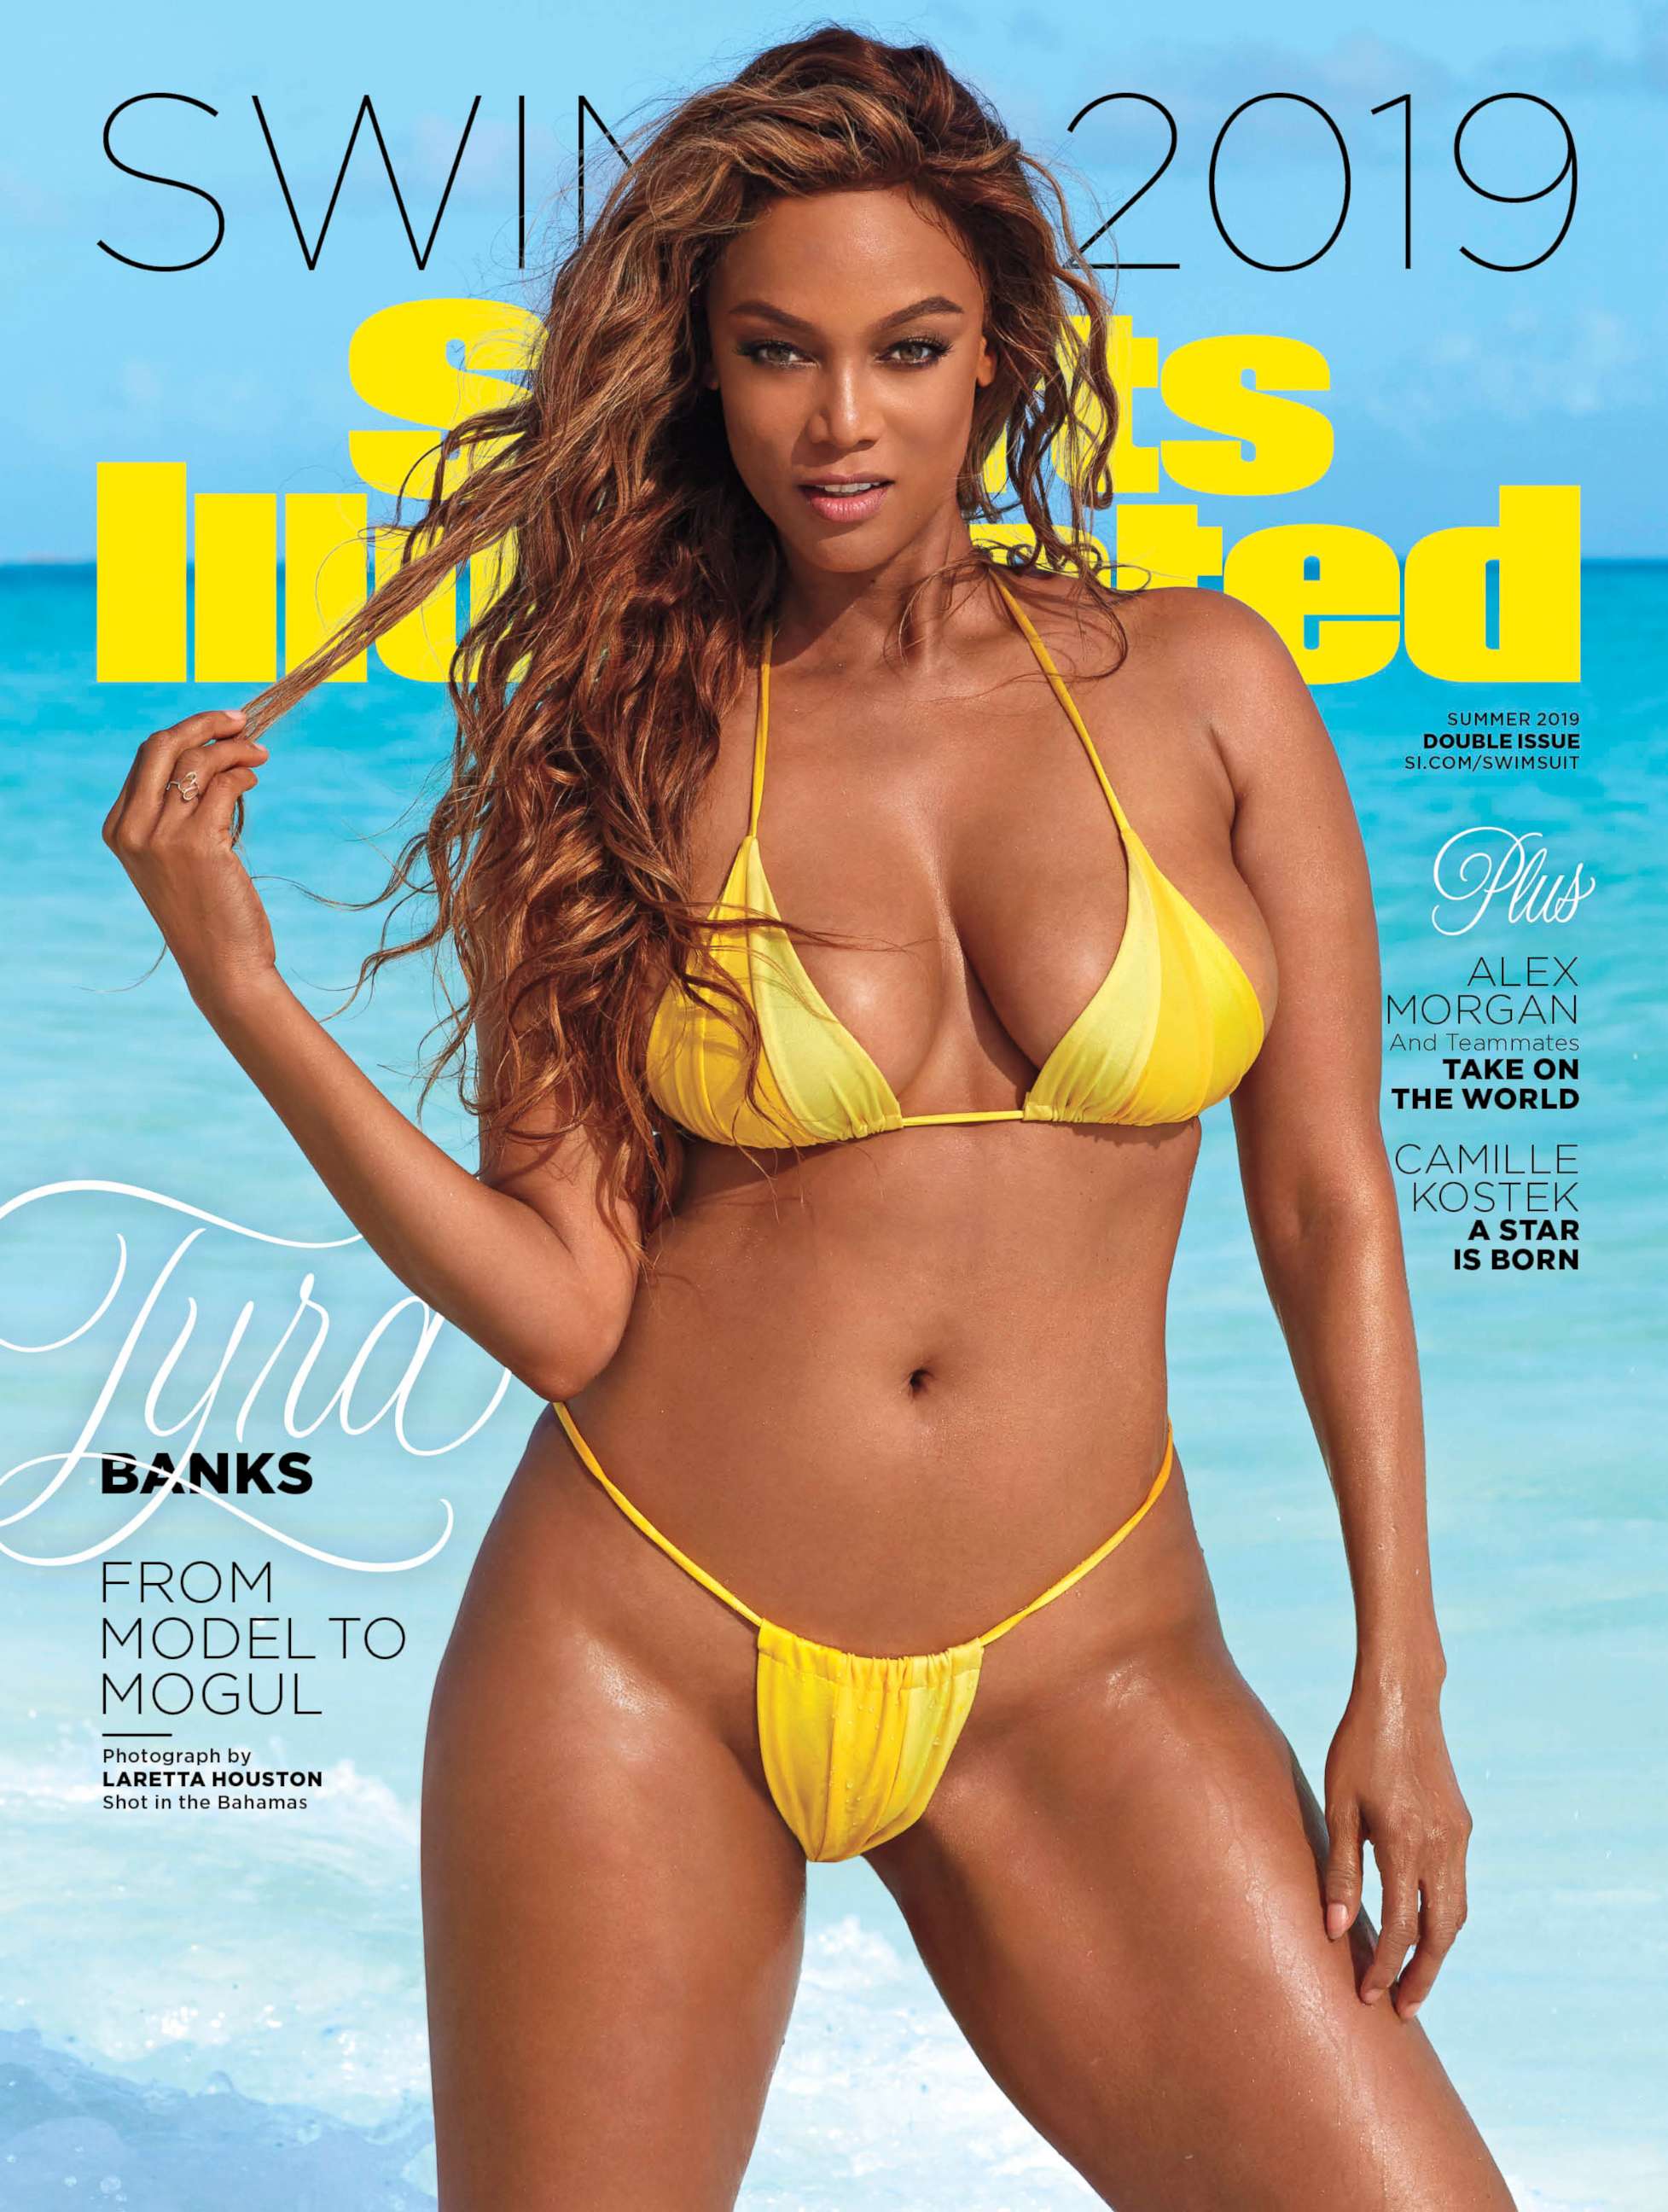 Tyra Banks, Alex Morgan and Camille Kostek cover 2019 Sports Illustrated Swimsuit Issue